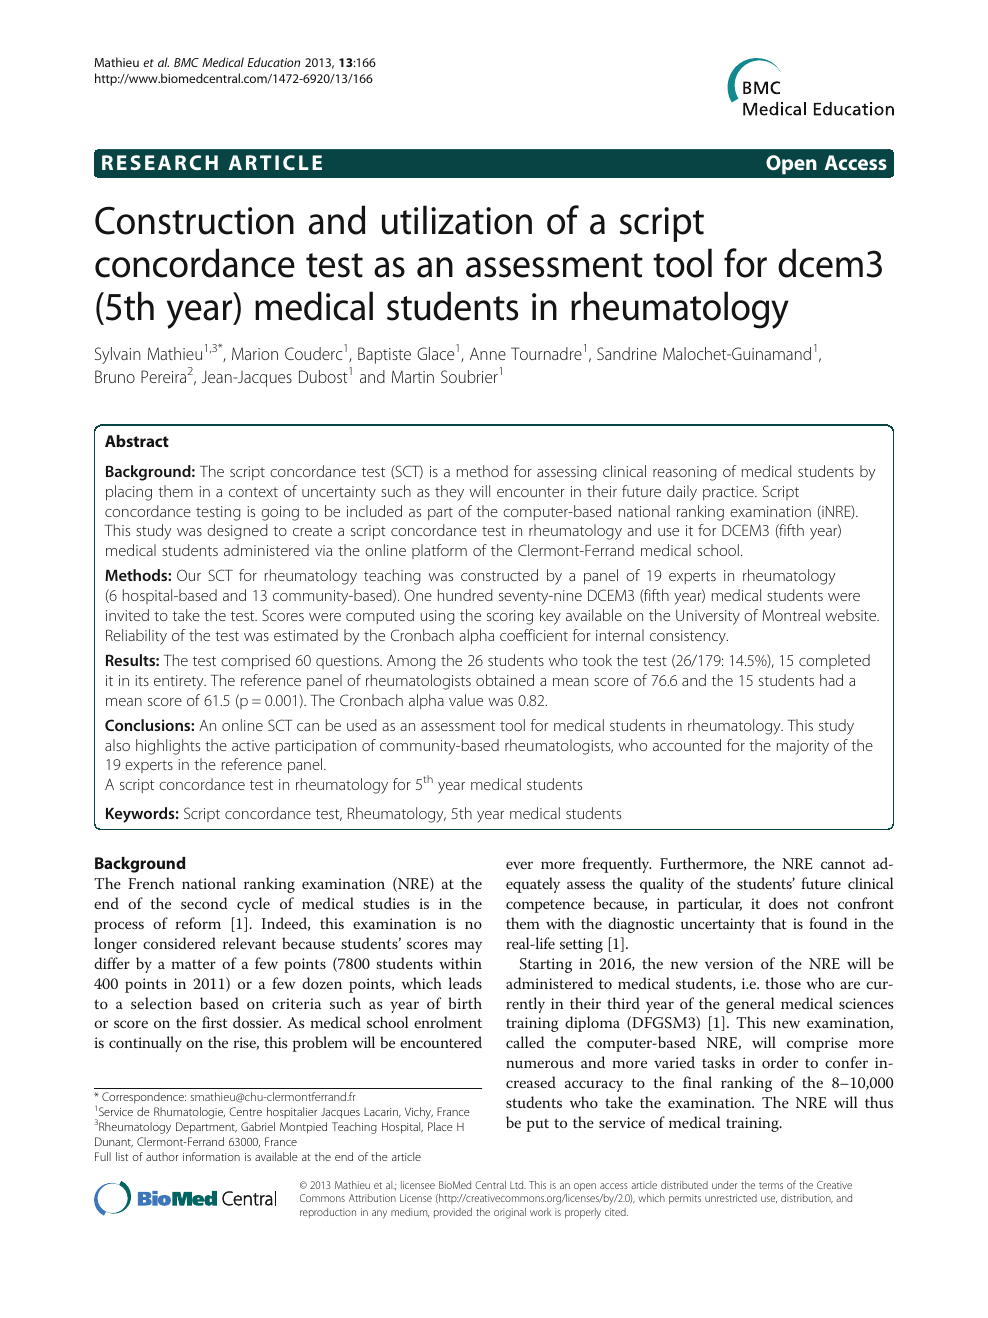 Construction And Utilization Of A Script Concordance Test As An Assessment Tool For Dcem3 5th Year Medical Students In Rheumatology Topic Of Research Paper In Clinical Medicine Download Scholarly Article Pdf